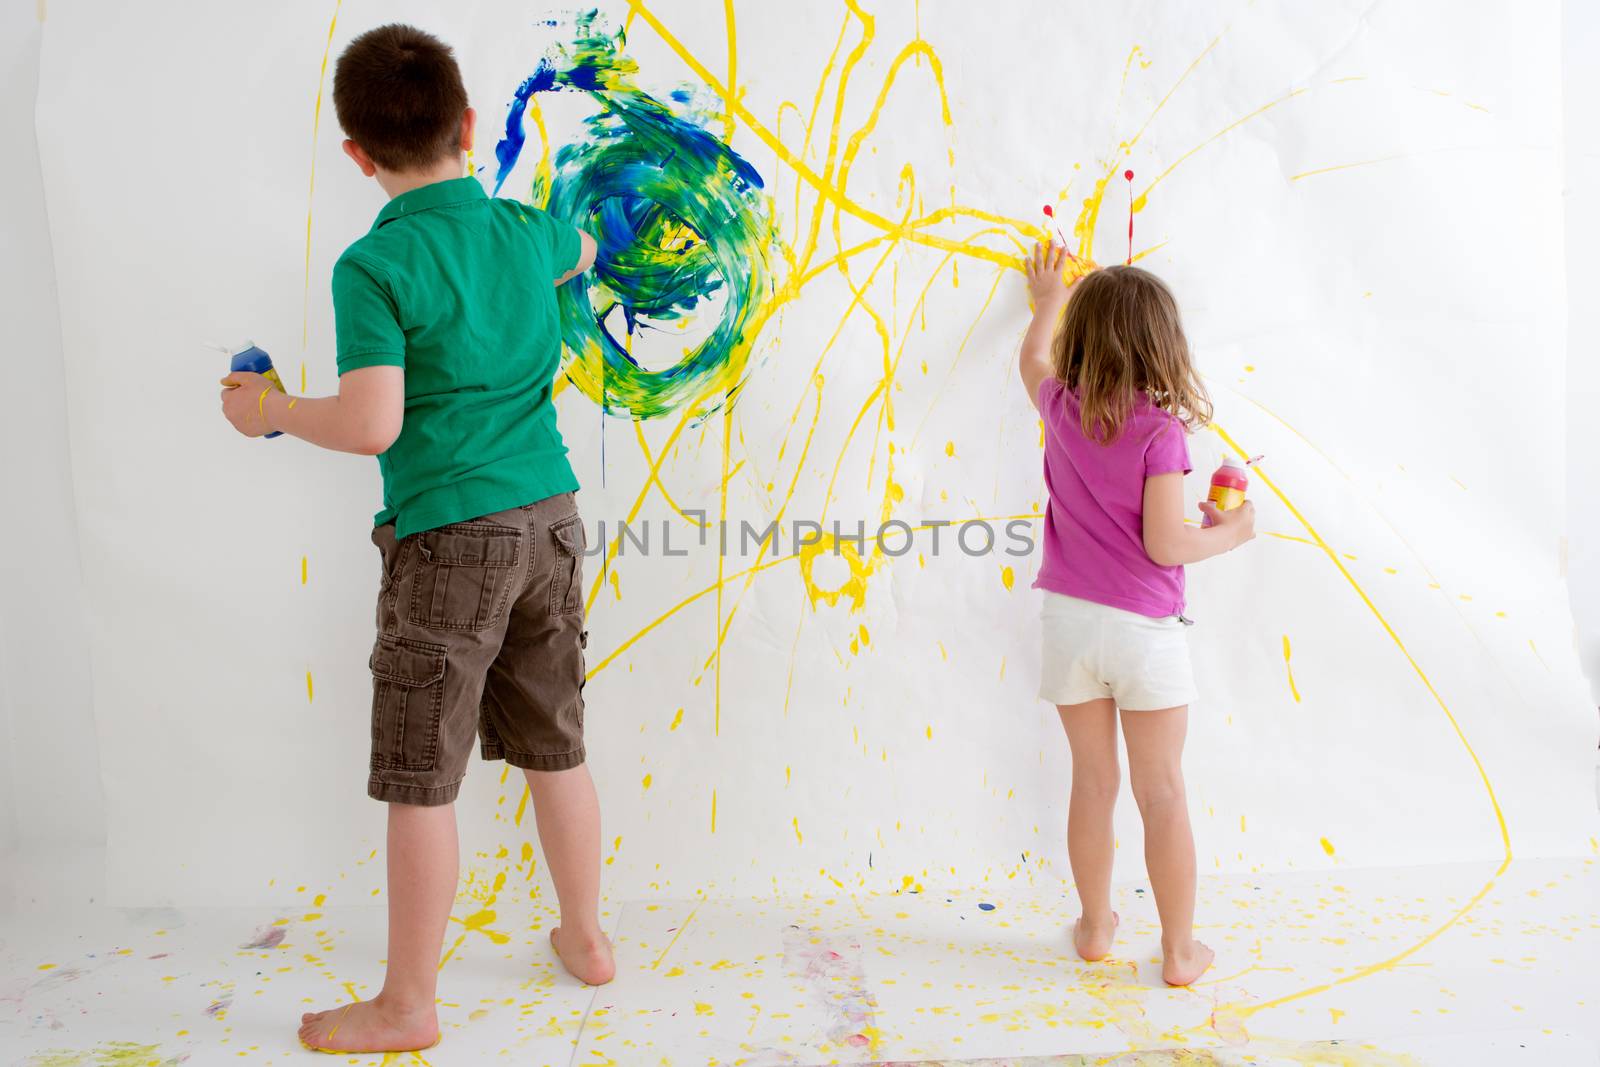 Two young children, a ten year old boy and three year old girl, freehand painting on a wall with colorful acrylic paints creating an abstract design viewed from behind